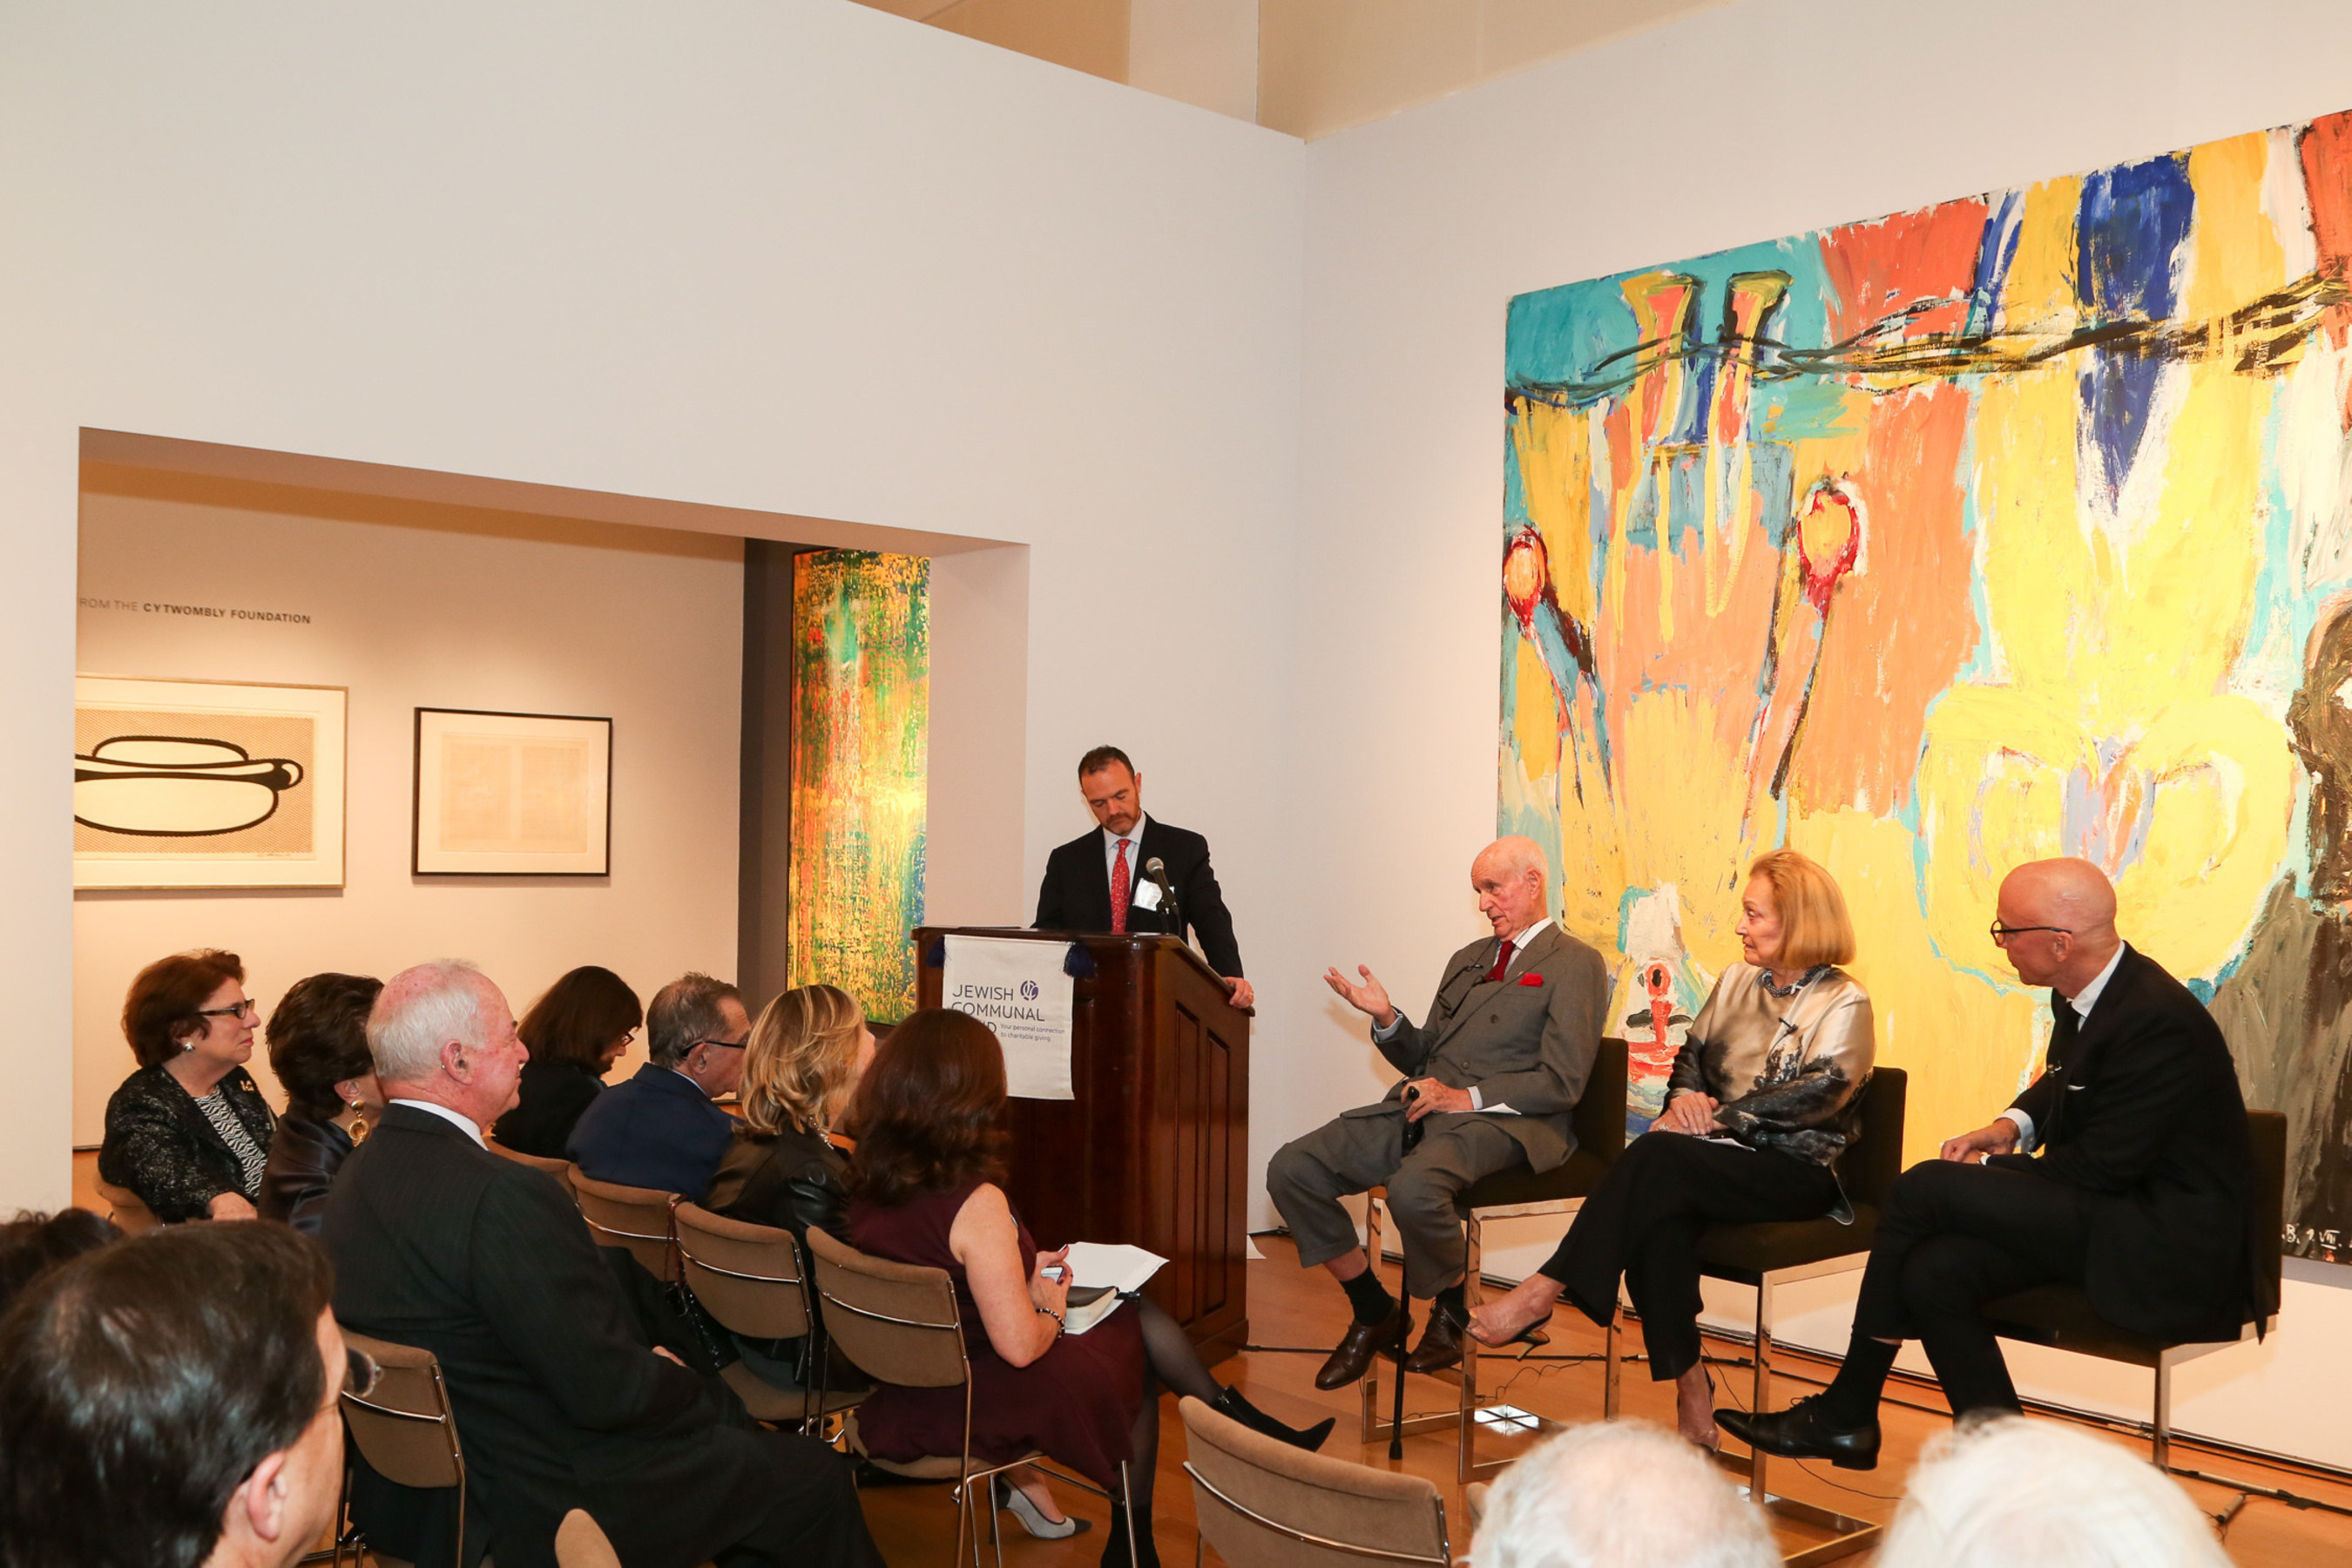 Donald, Barbara and John Jonas speak about "Philanthropy & Art" at a Jewish Communal Fund preview of the Post-War & Contemporary Art Sale at Christie's on Tuesday. The panel discussion was moderated by Walter Sweet of Rockefeller Philanthropy Advisors. Photo Credit: Chloe Seldman/Michael Priest Photography